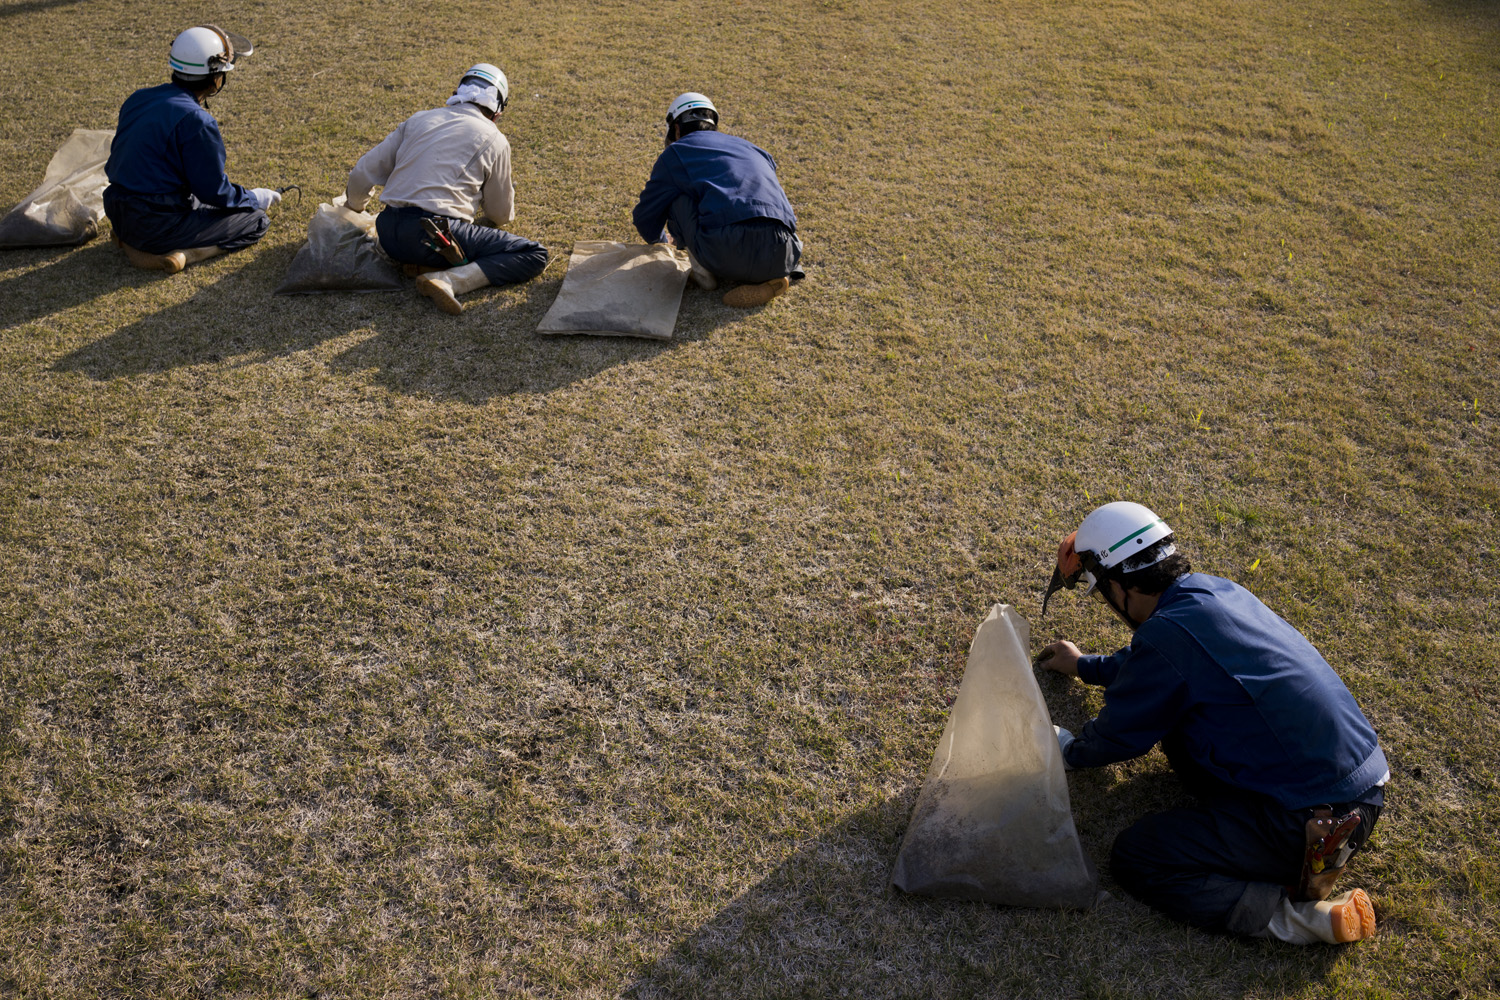 Japan, Ikata, 2014Workers cut the grass by hand in the Ikata Nuclear Power Station by Shikoku electric Power Co. in the south of the country.